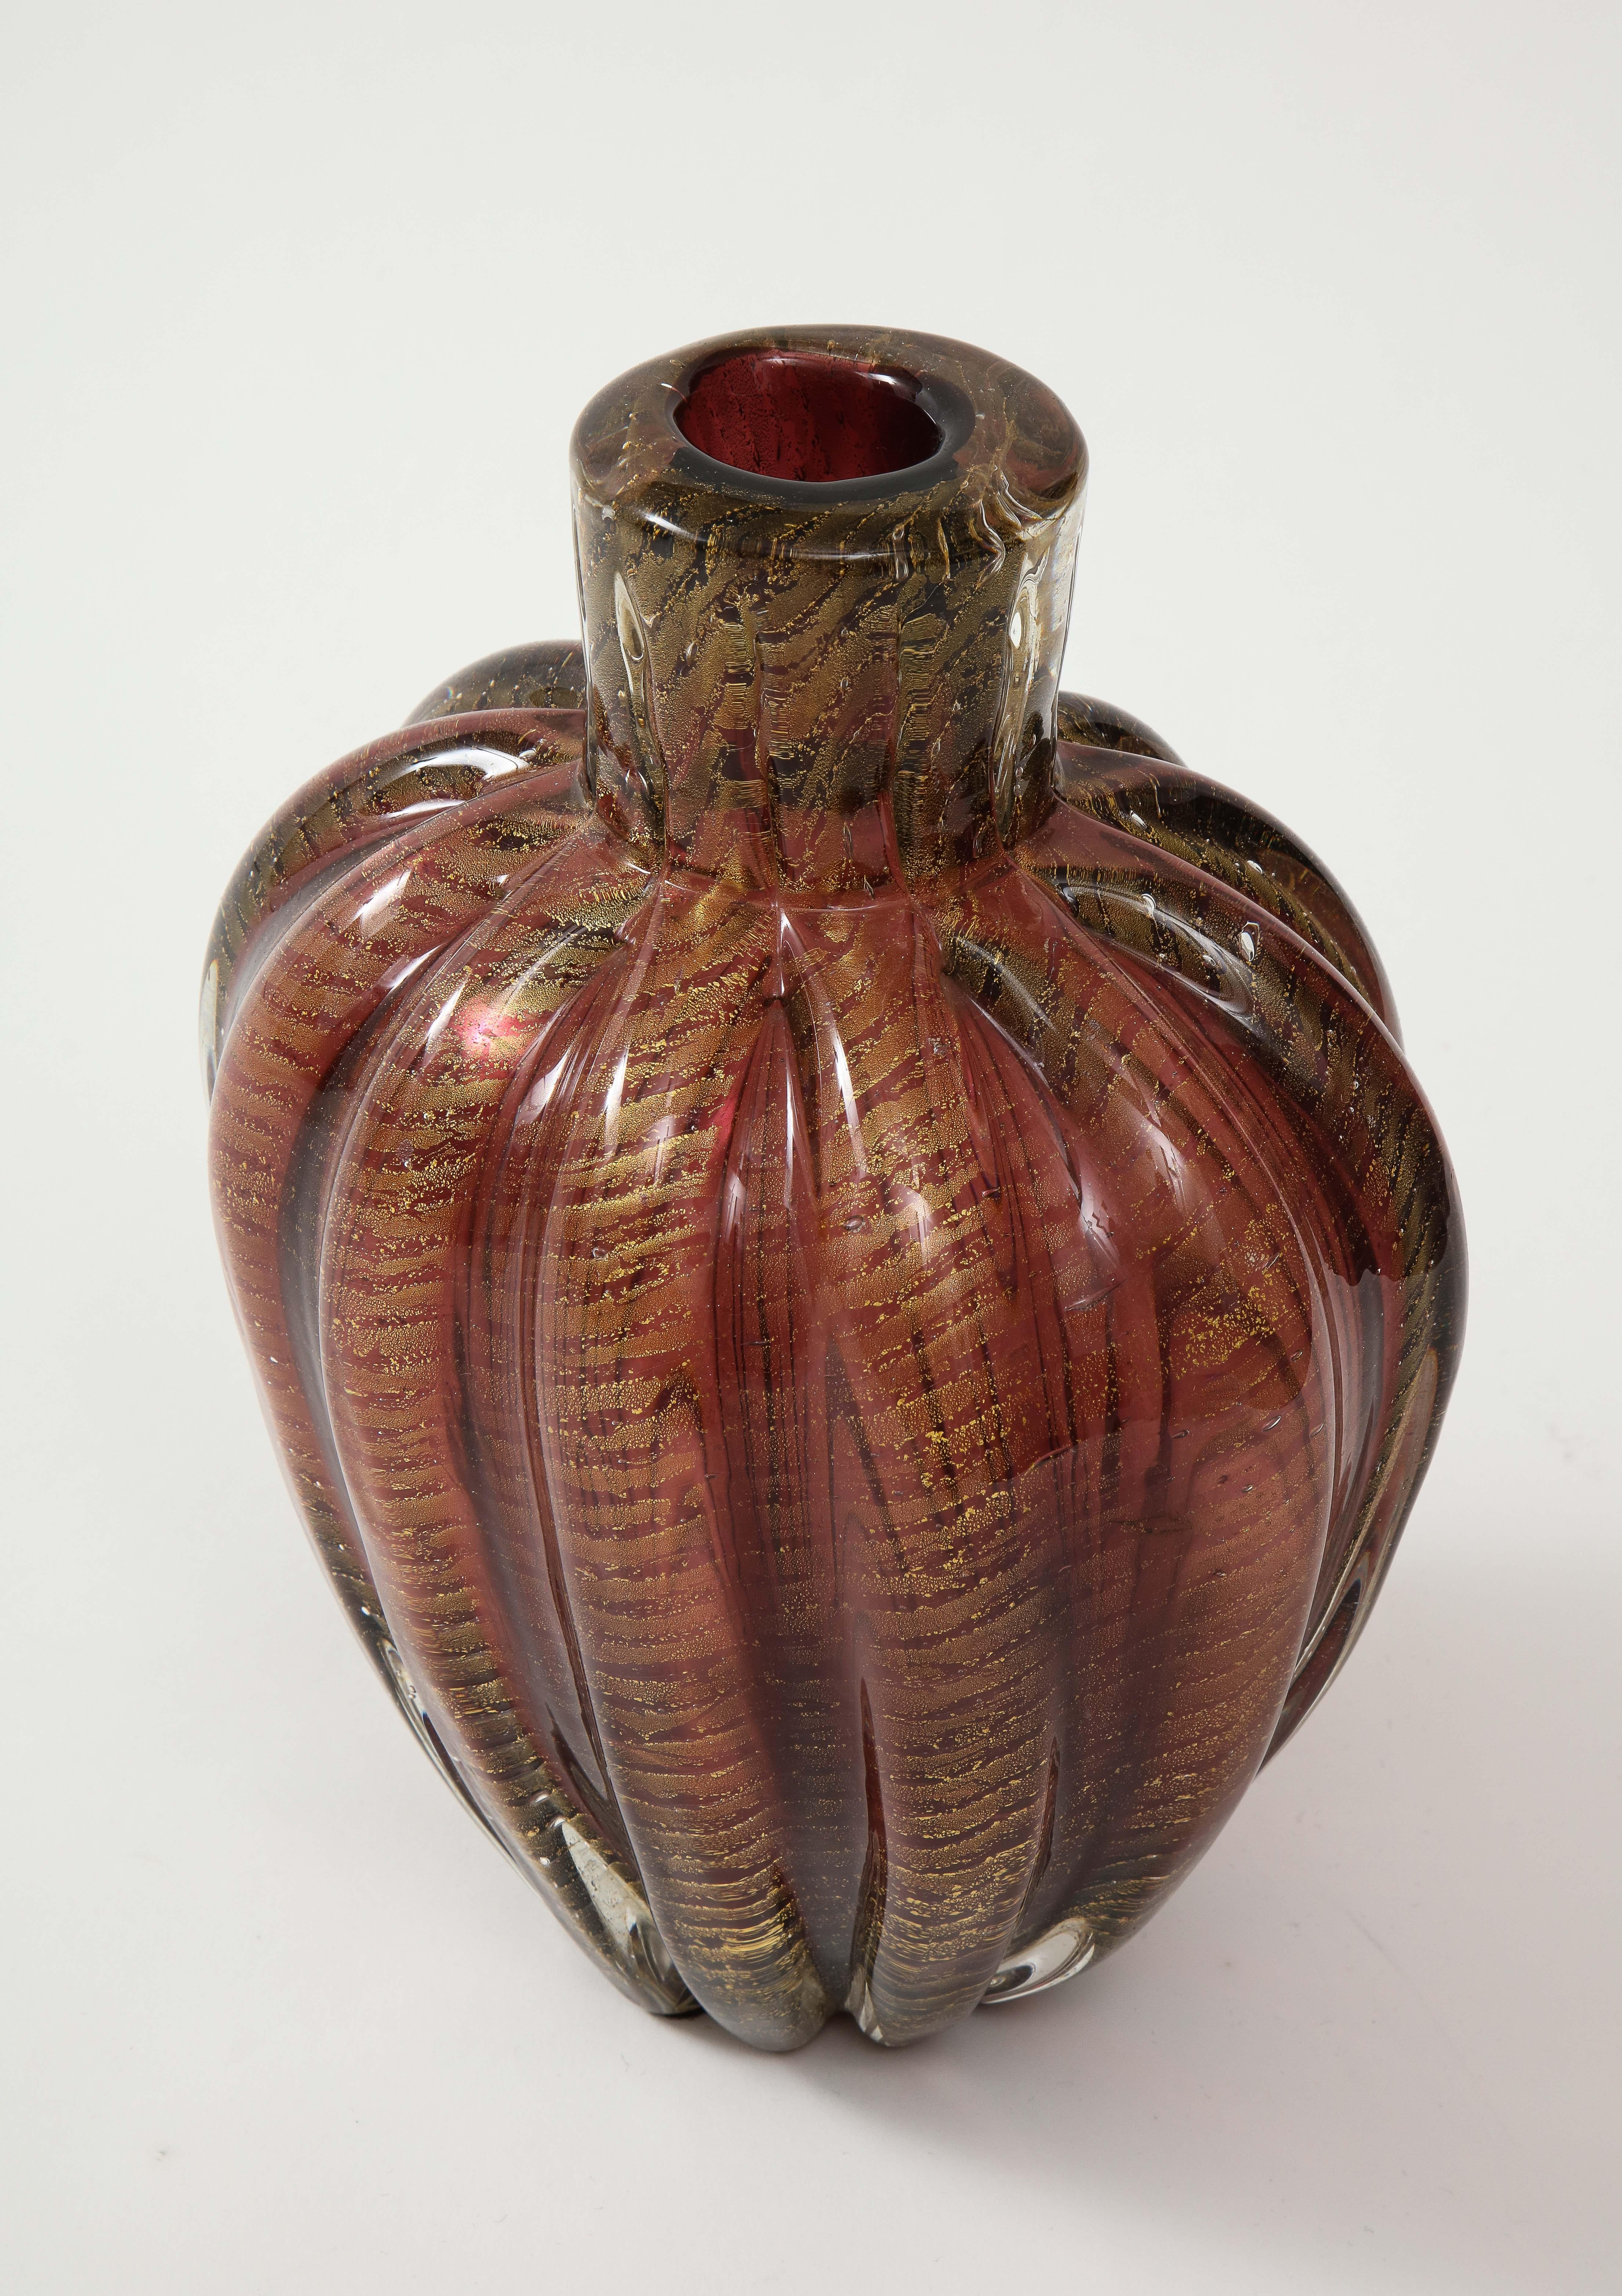 1970s Mid-Century Modern Murano glass vase, in good vintage original condition with minor wear and patina due to age and use.